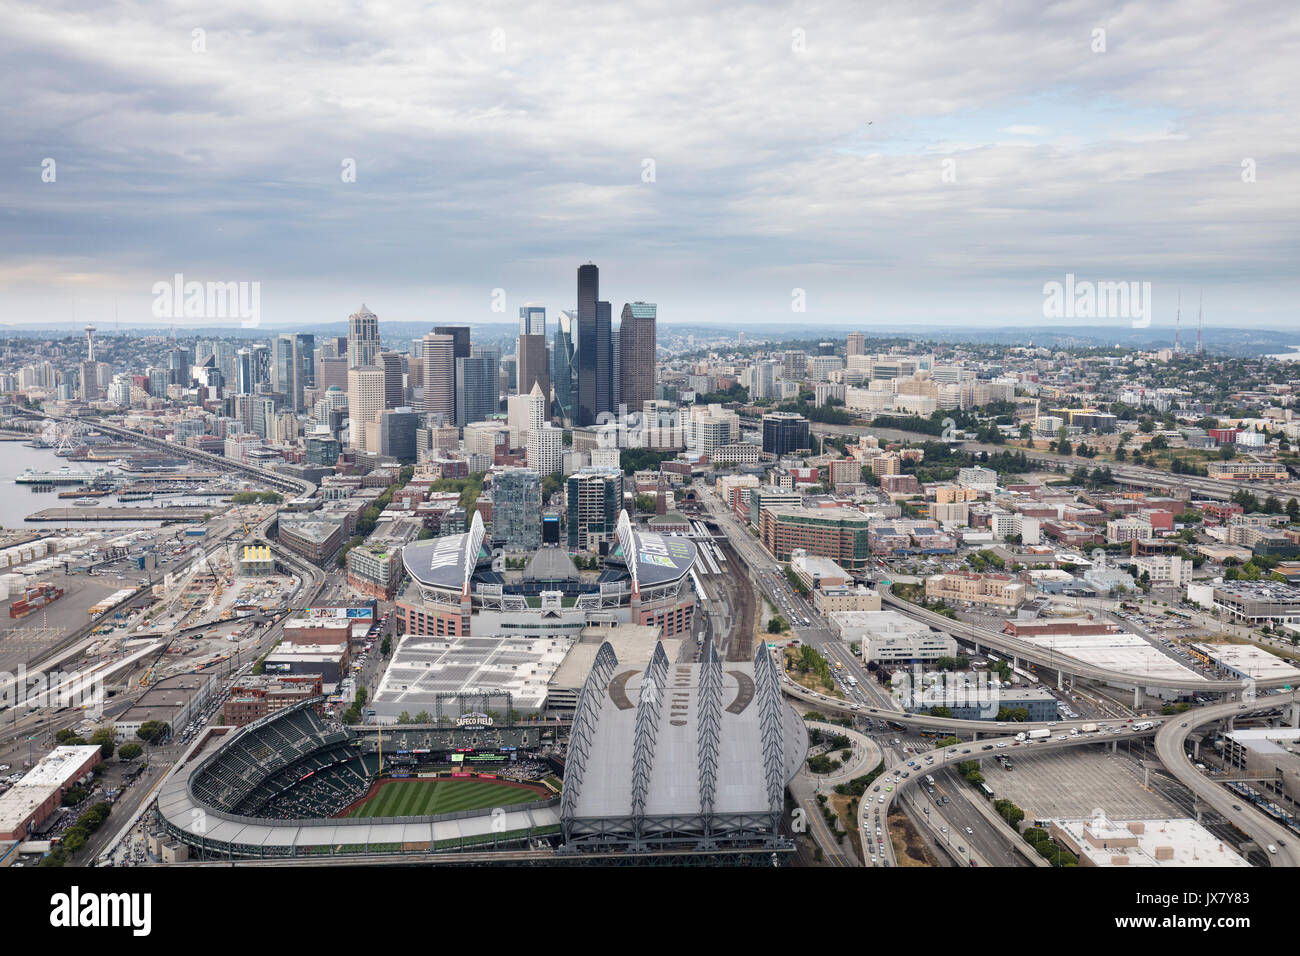 aerial view of CenturyLink Field and Safeco Field stadiums and downtown Seattle, Washington State, USA Stock Photo